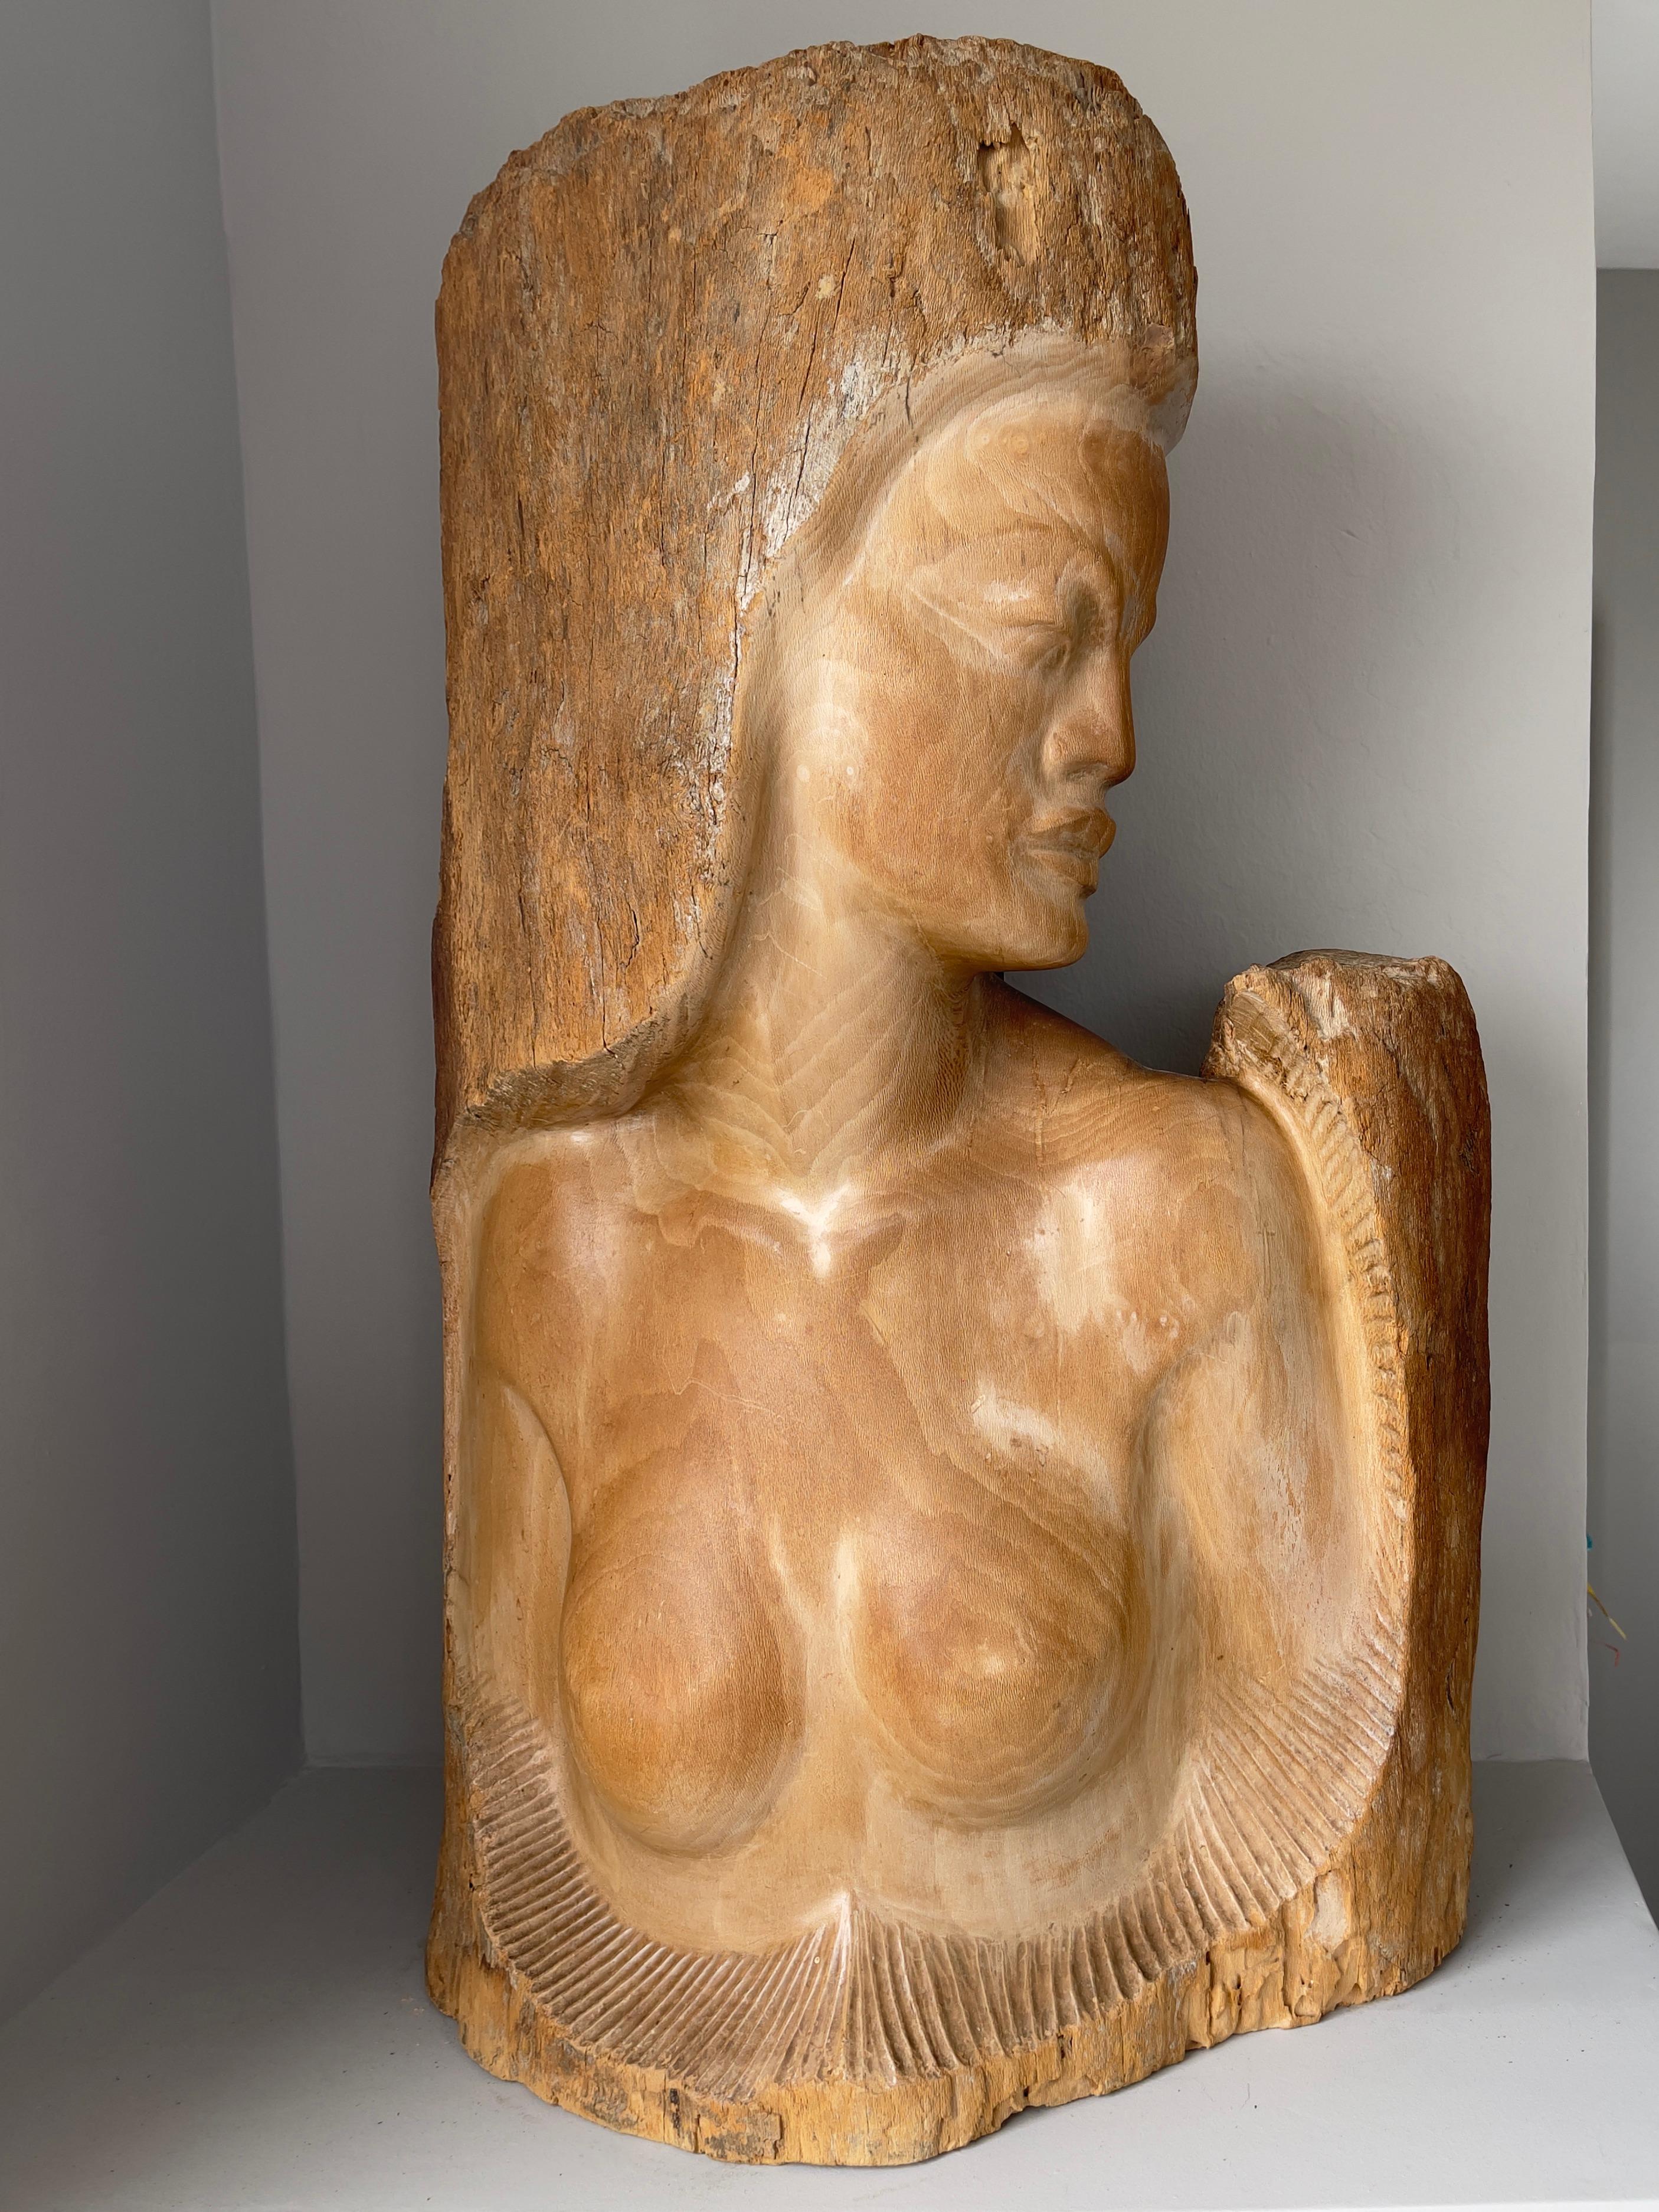 Untitled carved sycamore Hawaiian deity by Fritz Abplanalp, circa 1951. Monogrammed, dated and inscribed underneath with unknown label. Sculpture measures 18